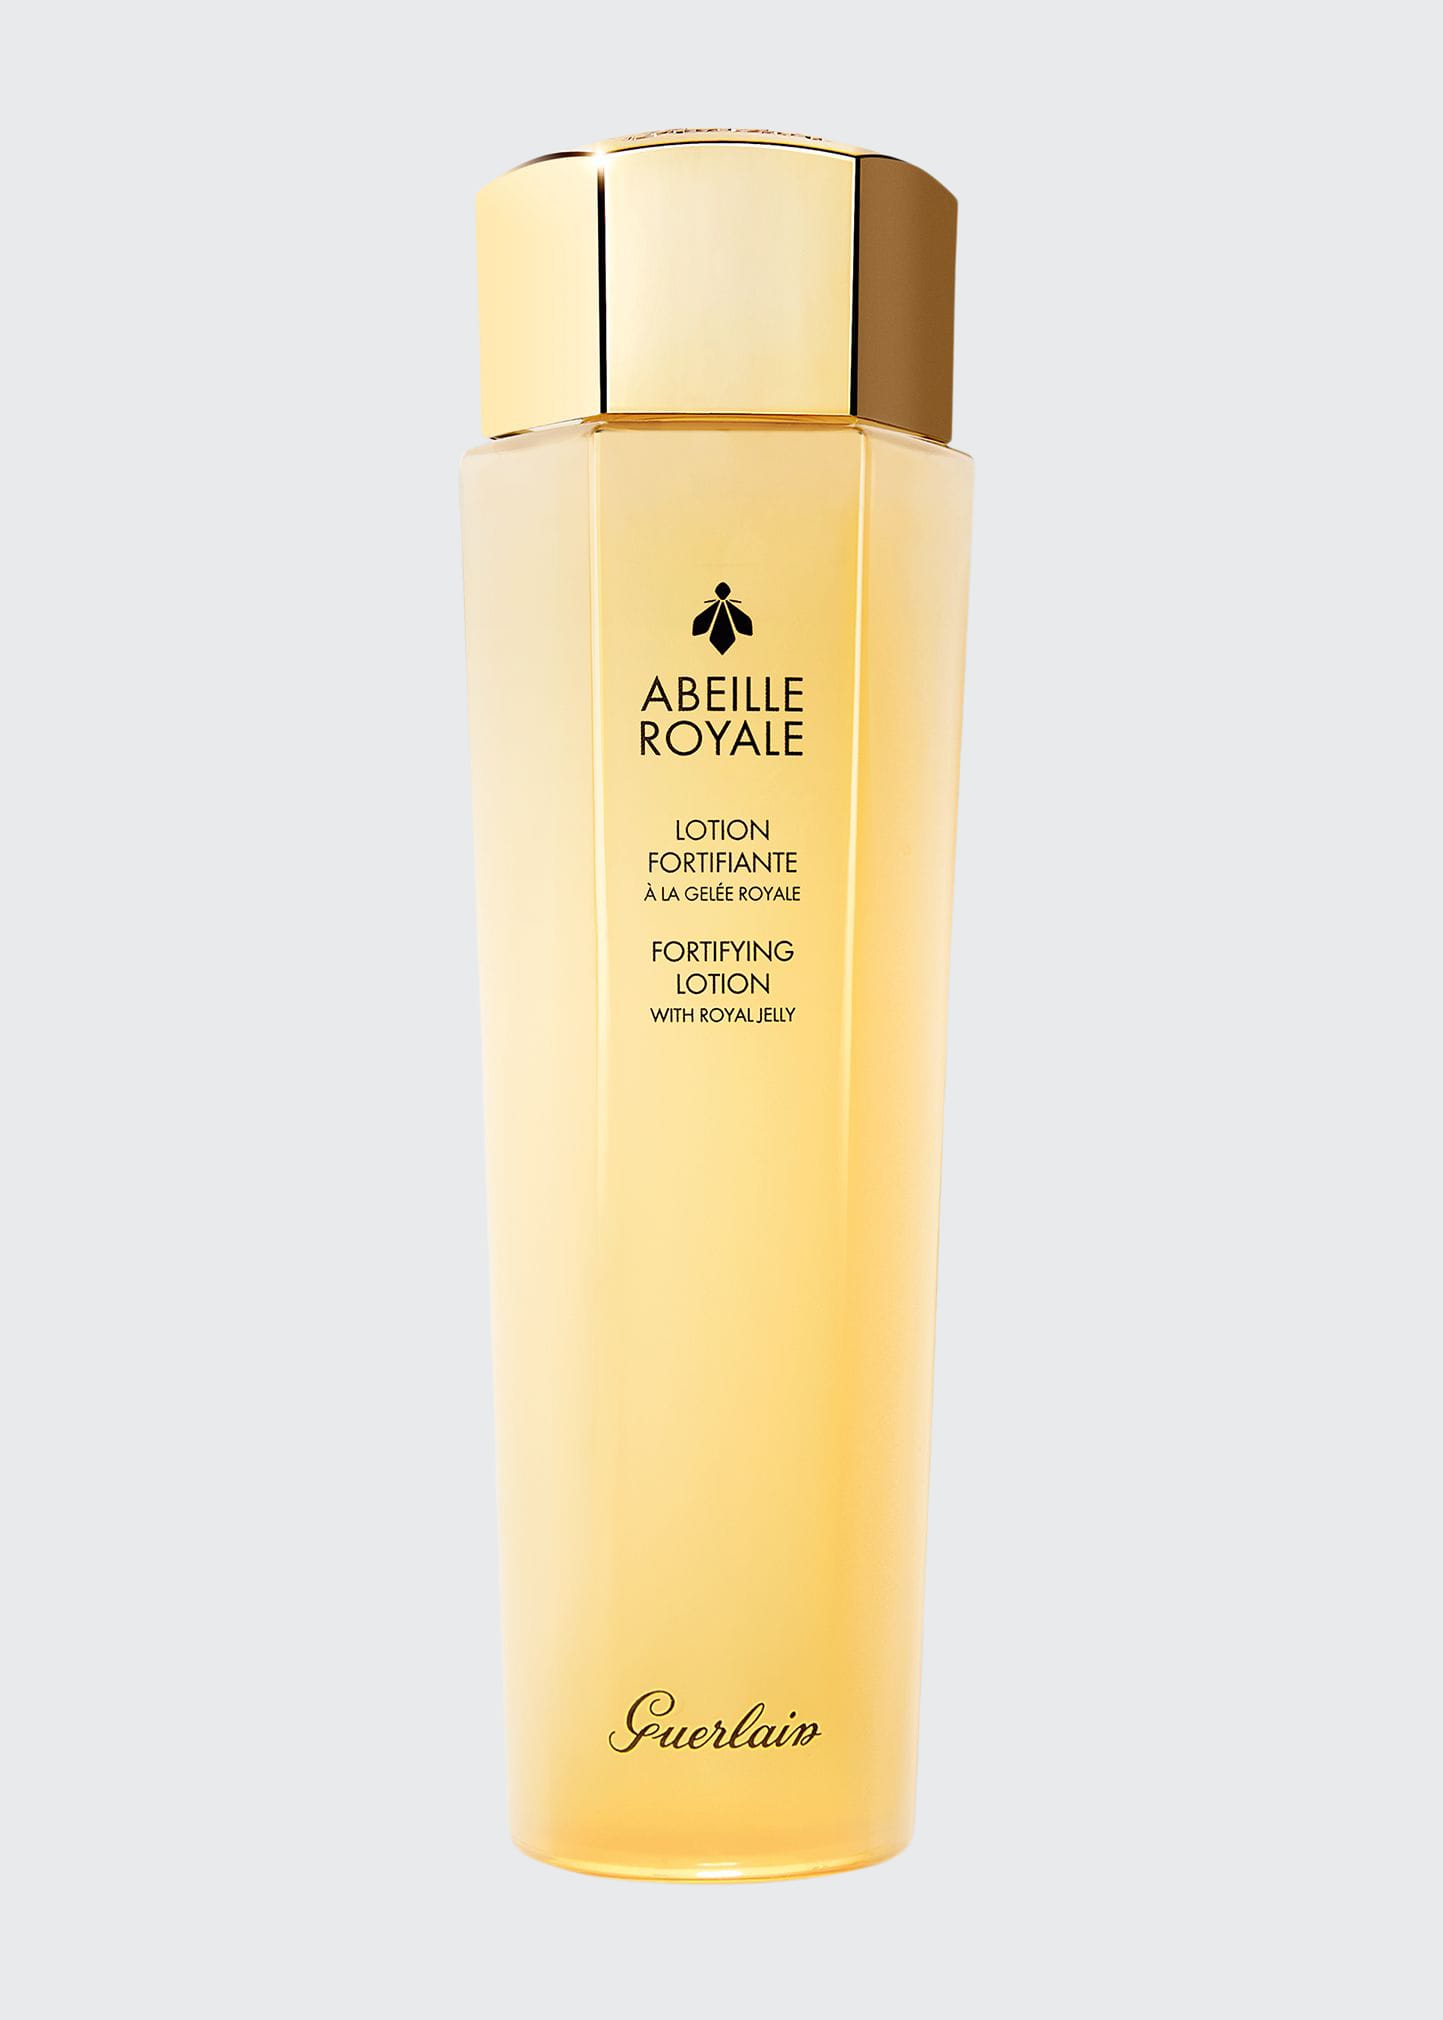 Abeille Royale Anti-Aging Fortifying Lotion with Royal Jelly, 5 oz.